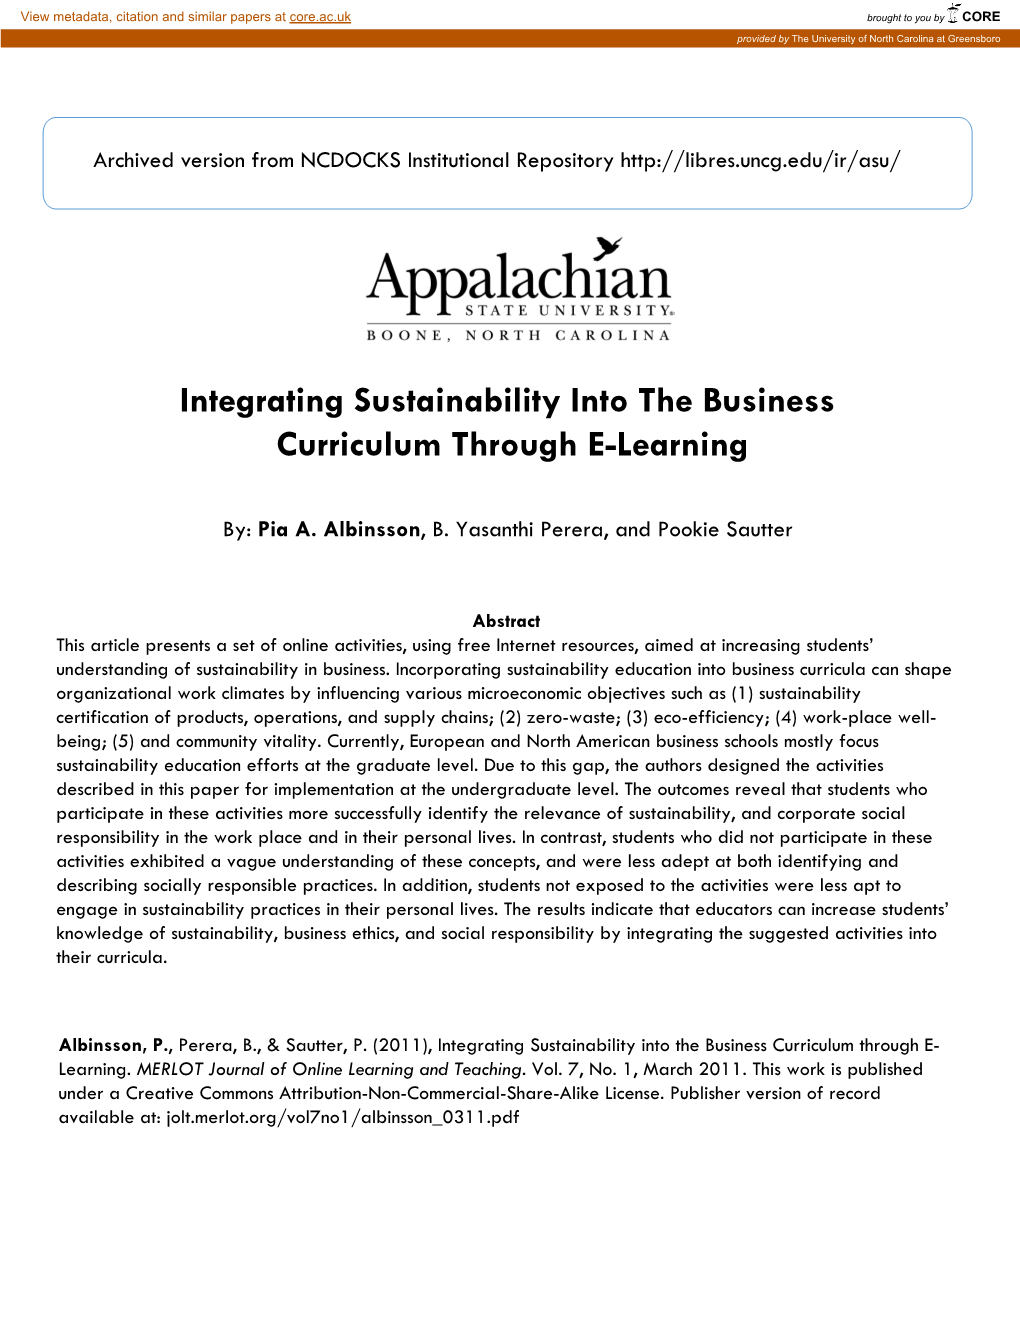 Integrating Sustainability Into the Business Curriculum Through E-Learning